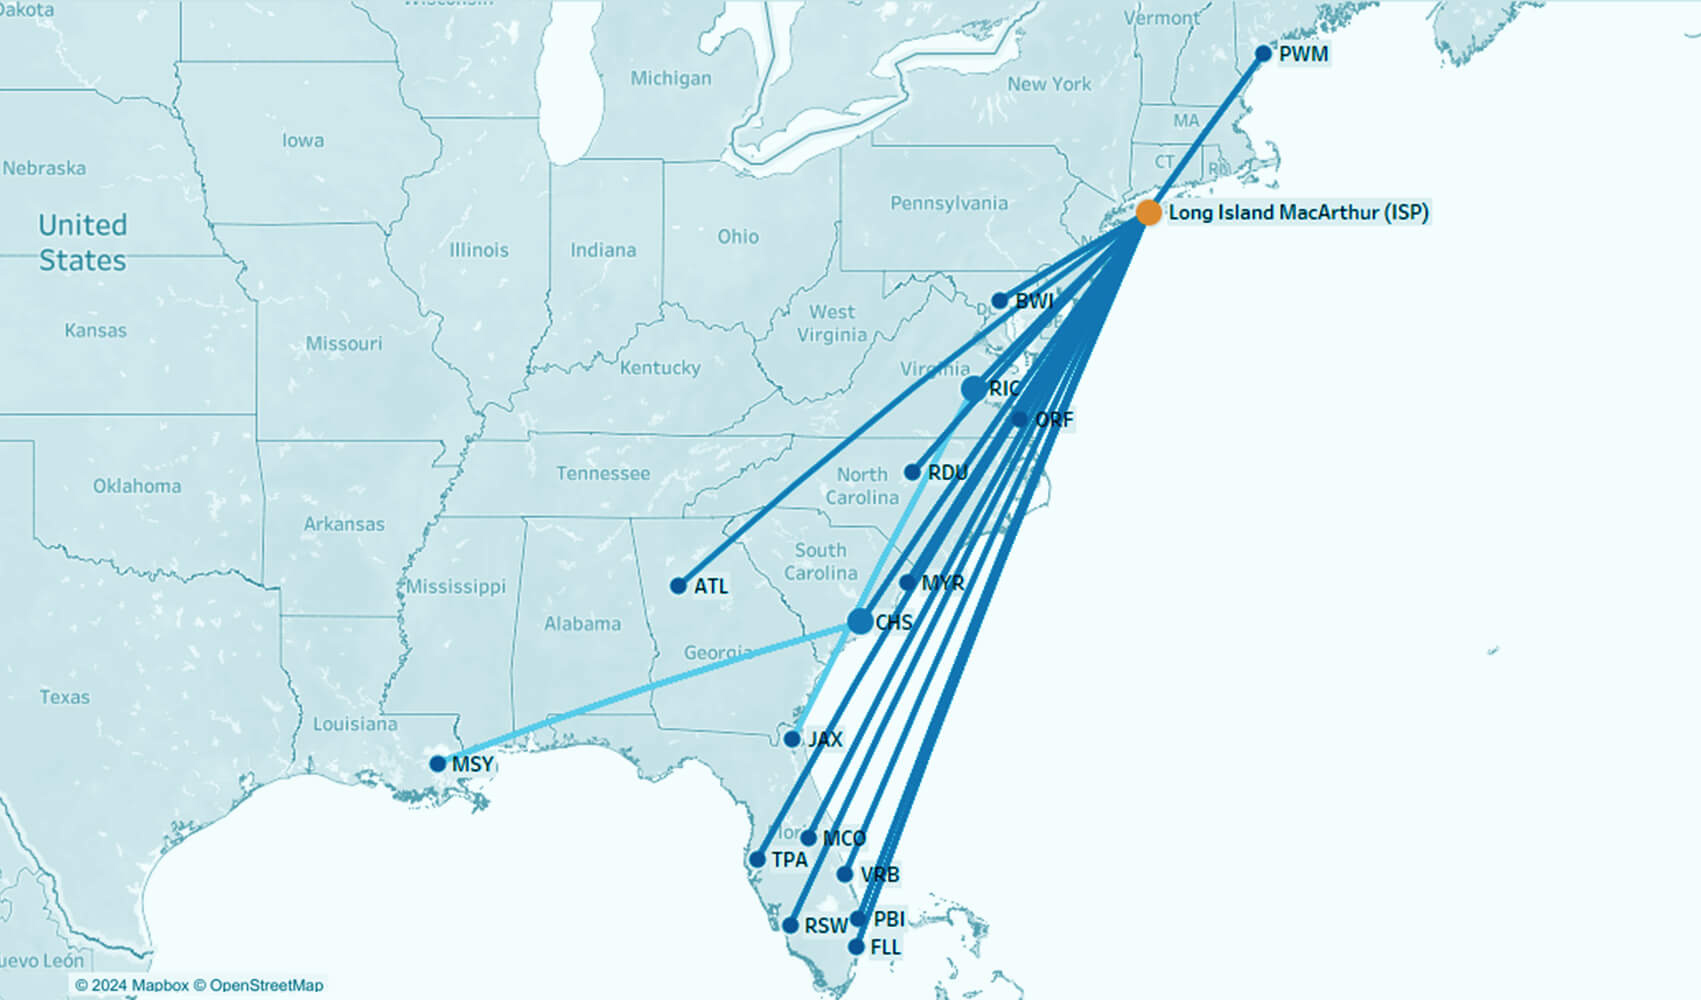 ISP Route Map.All Airlines